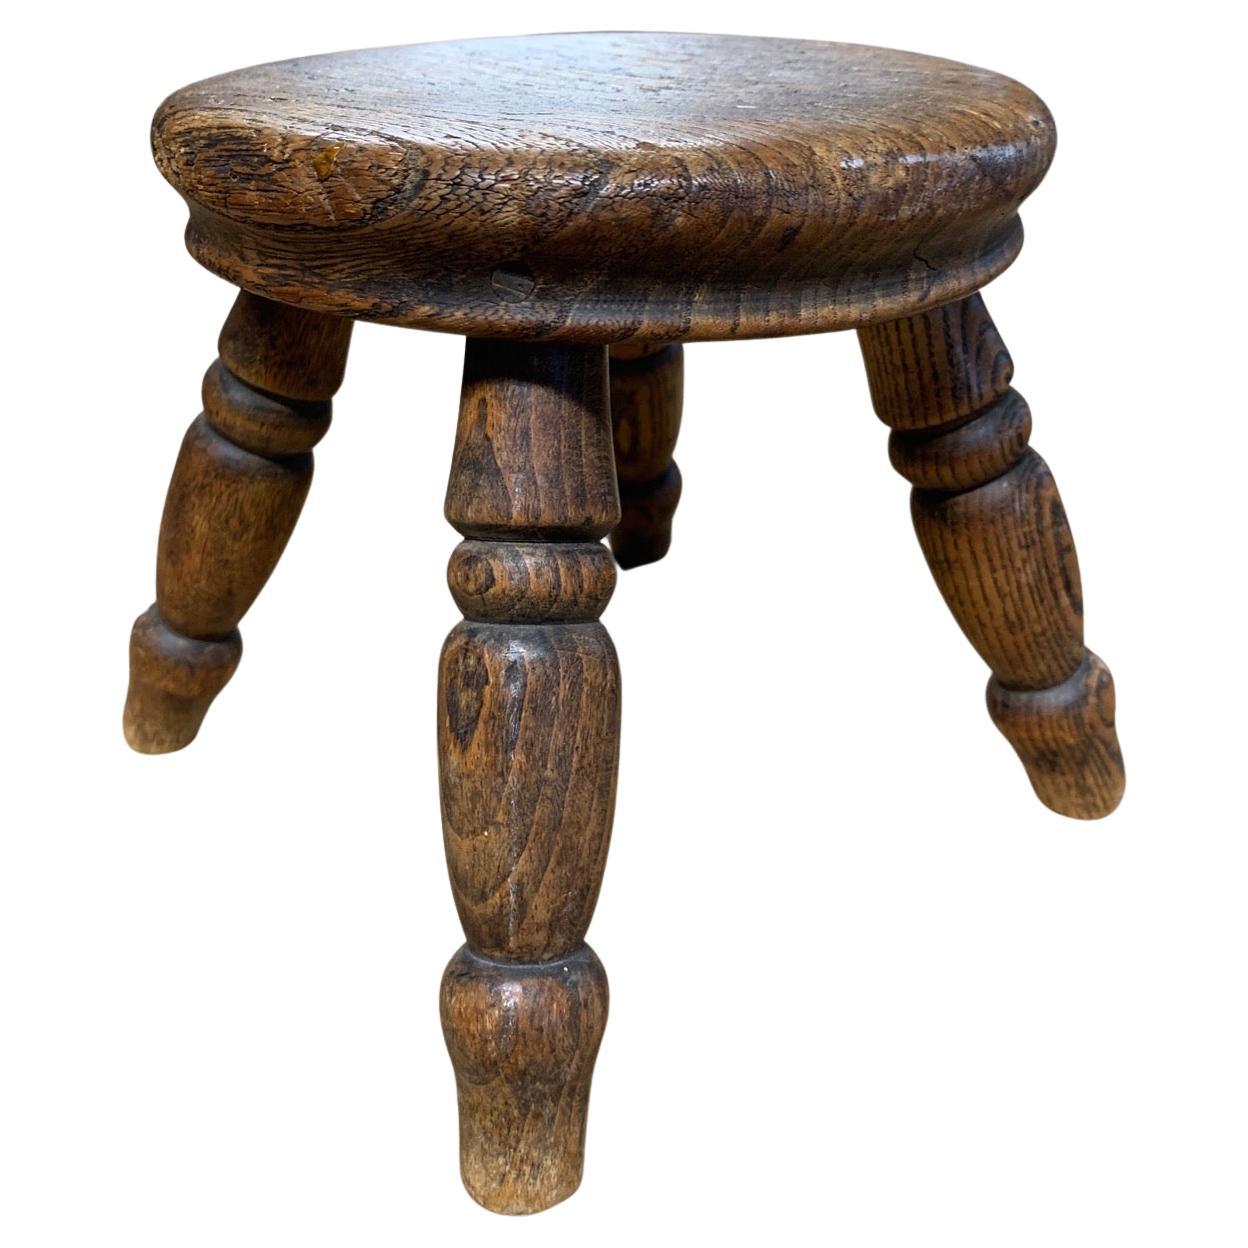 Small 19th Century Welsh Milking Stool